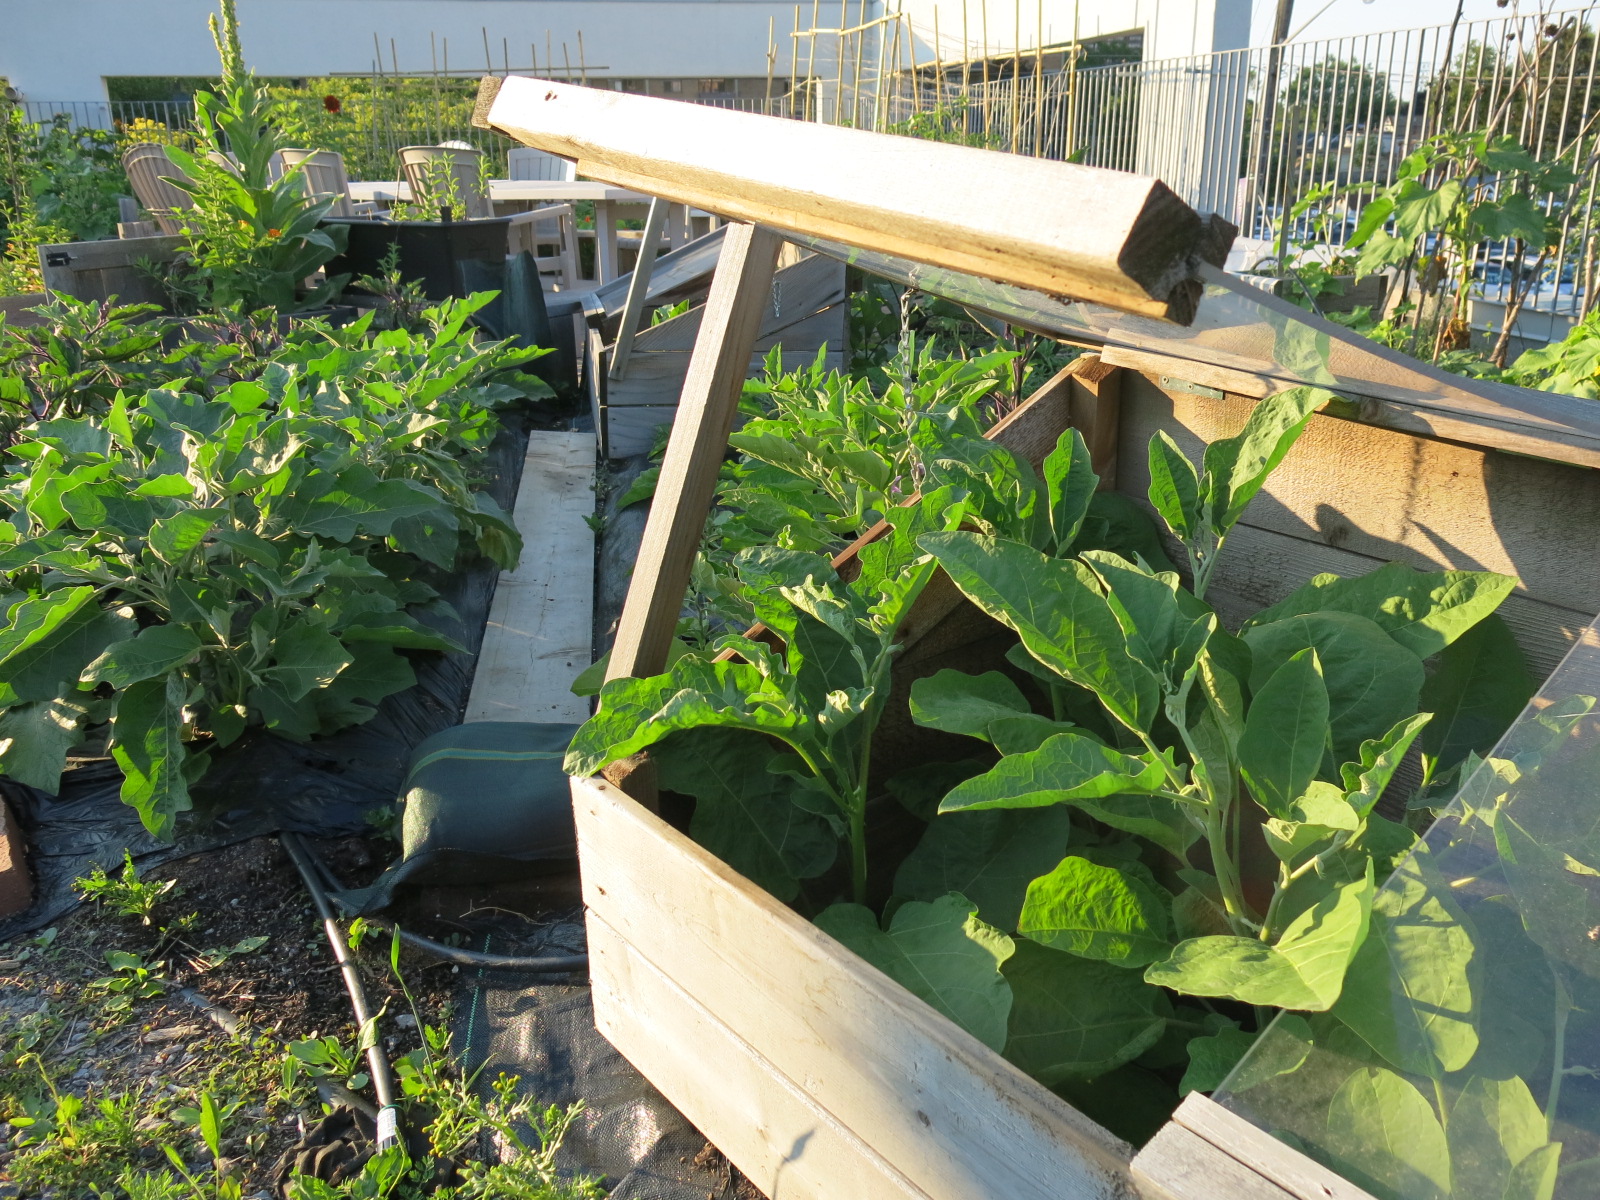 Cold frames with eggplants on Access Alliance's Green Roof at Danforth and Victoria Park